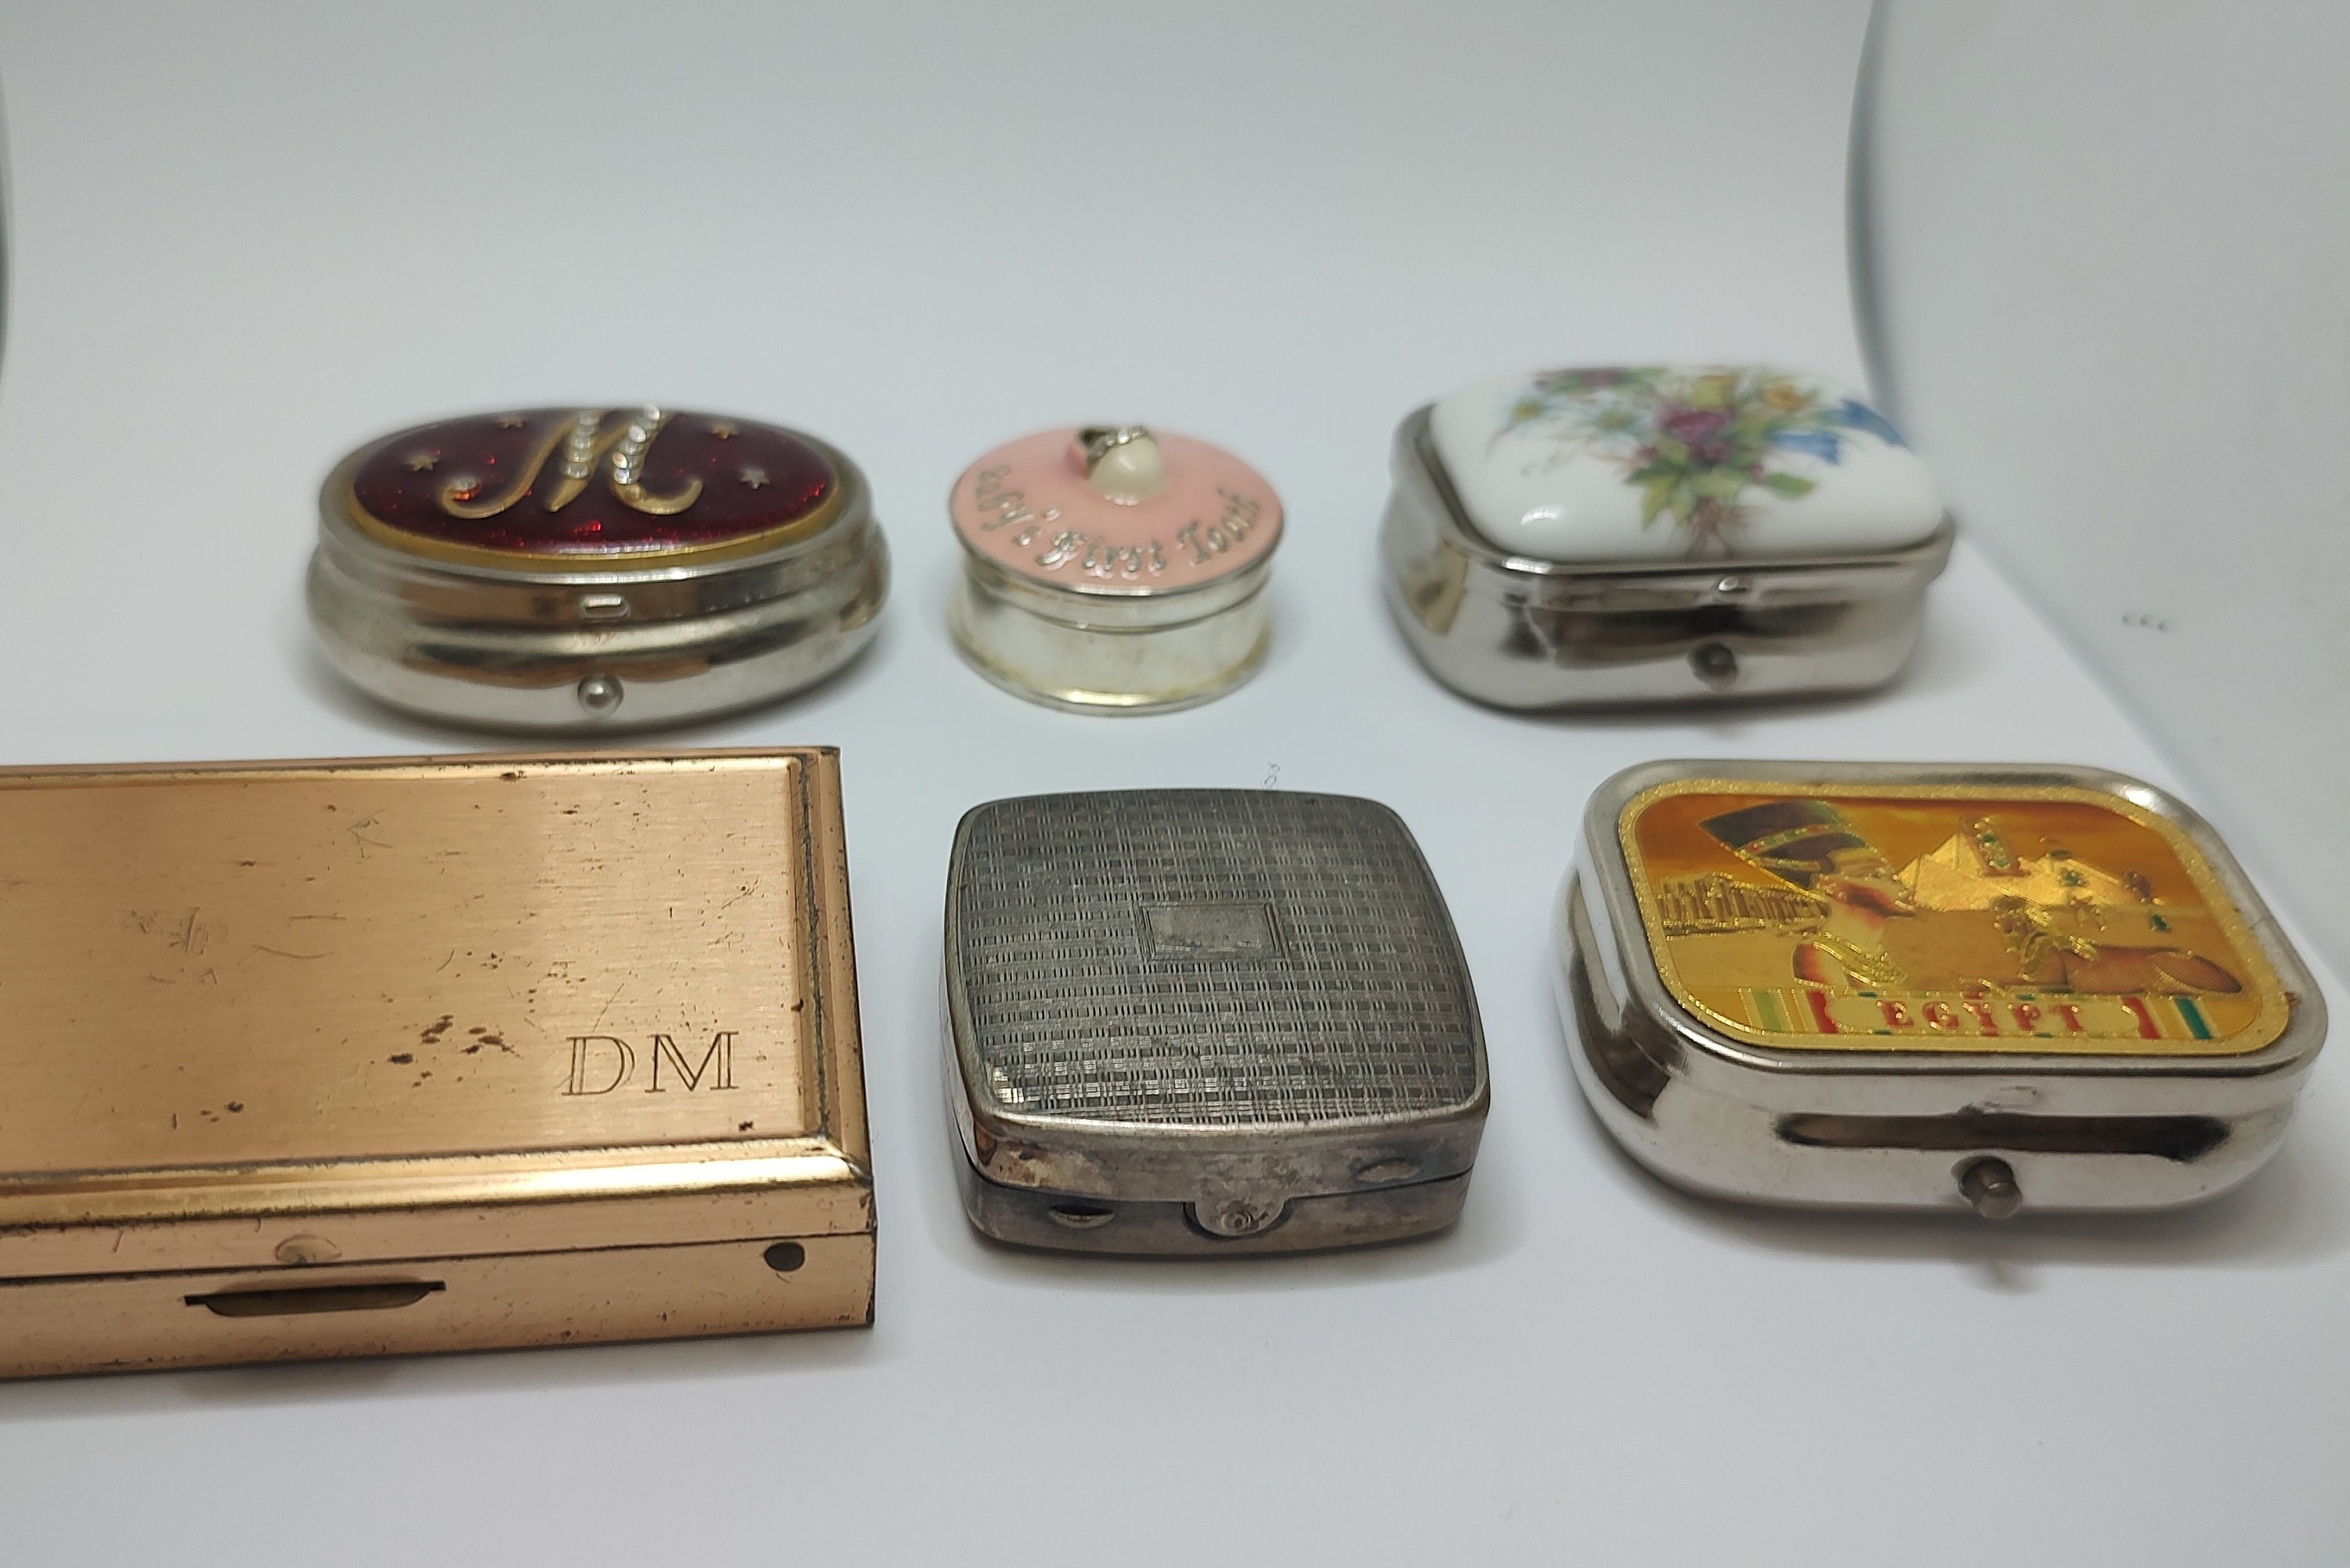 Mini Metal Storage Box With Cute Paper Clip Small Metal Container